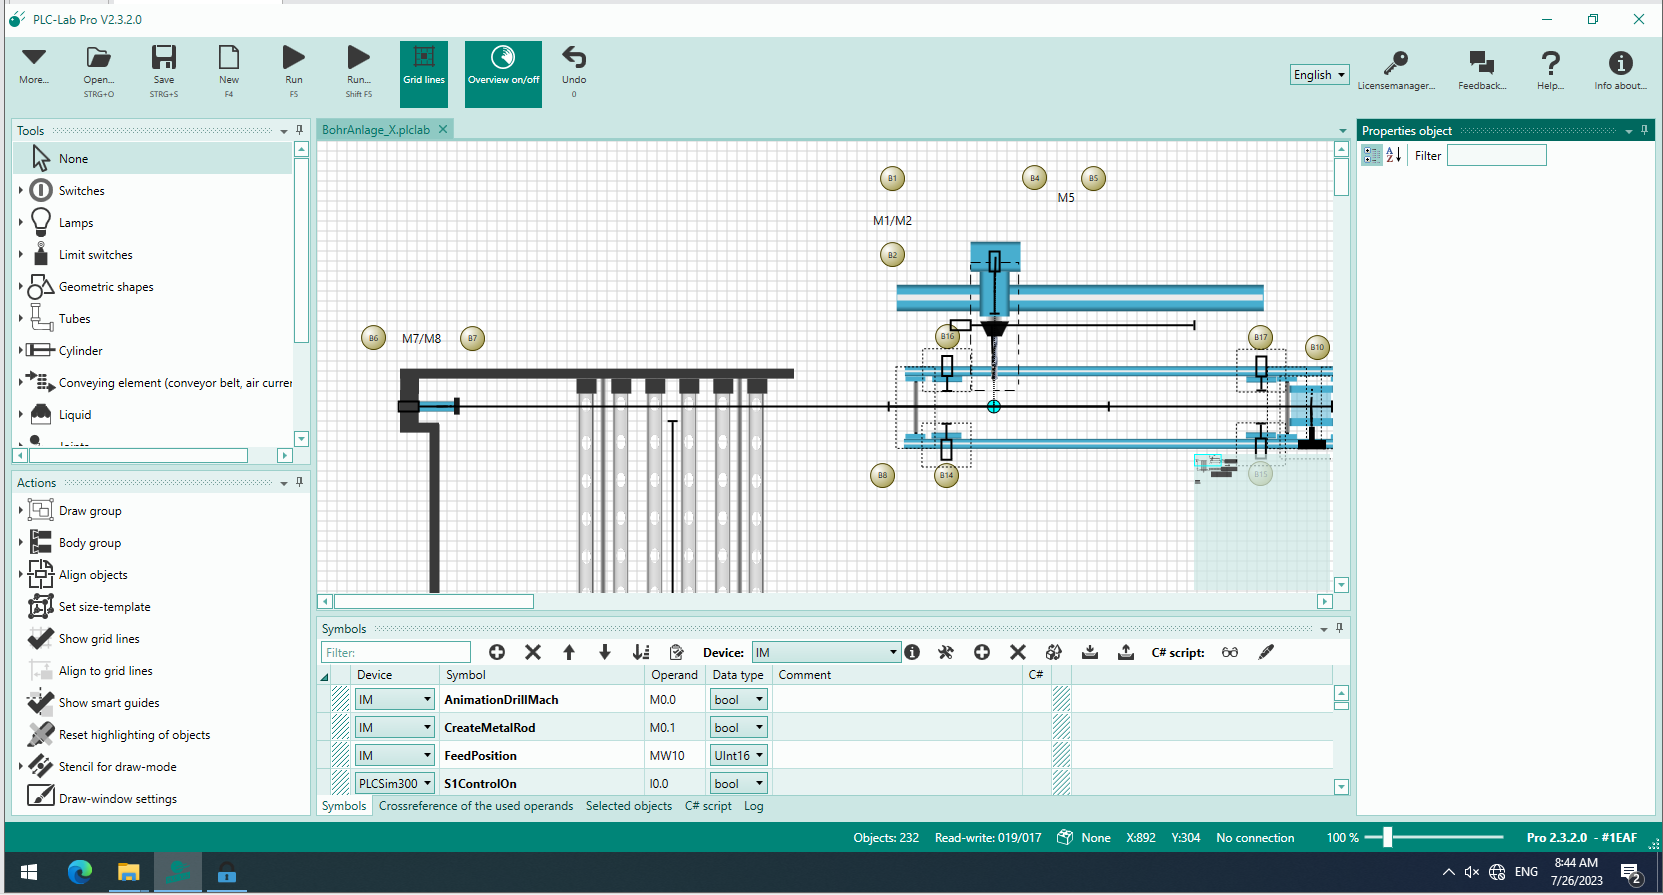 Working with PLC-Lab Pro 2.3.2 full license